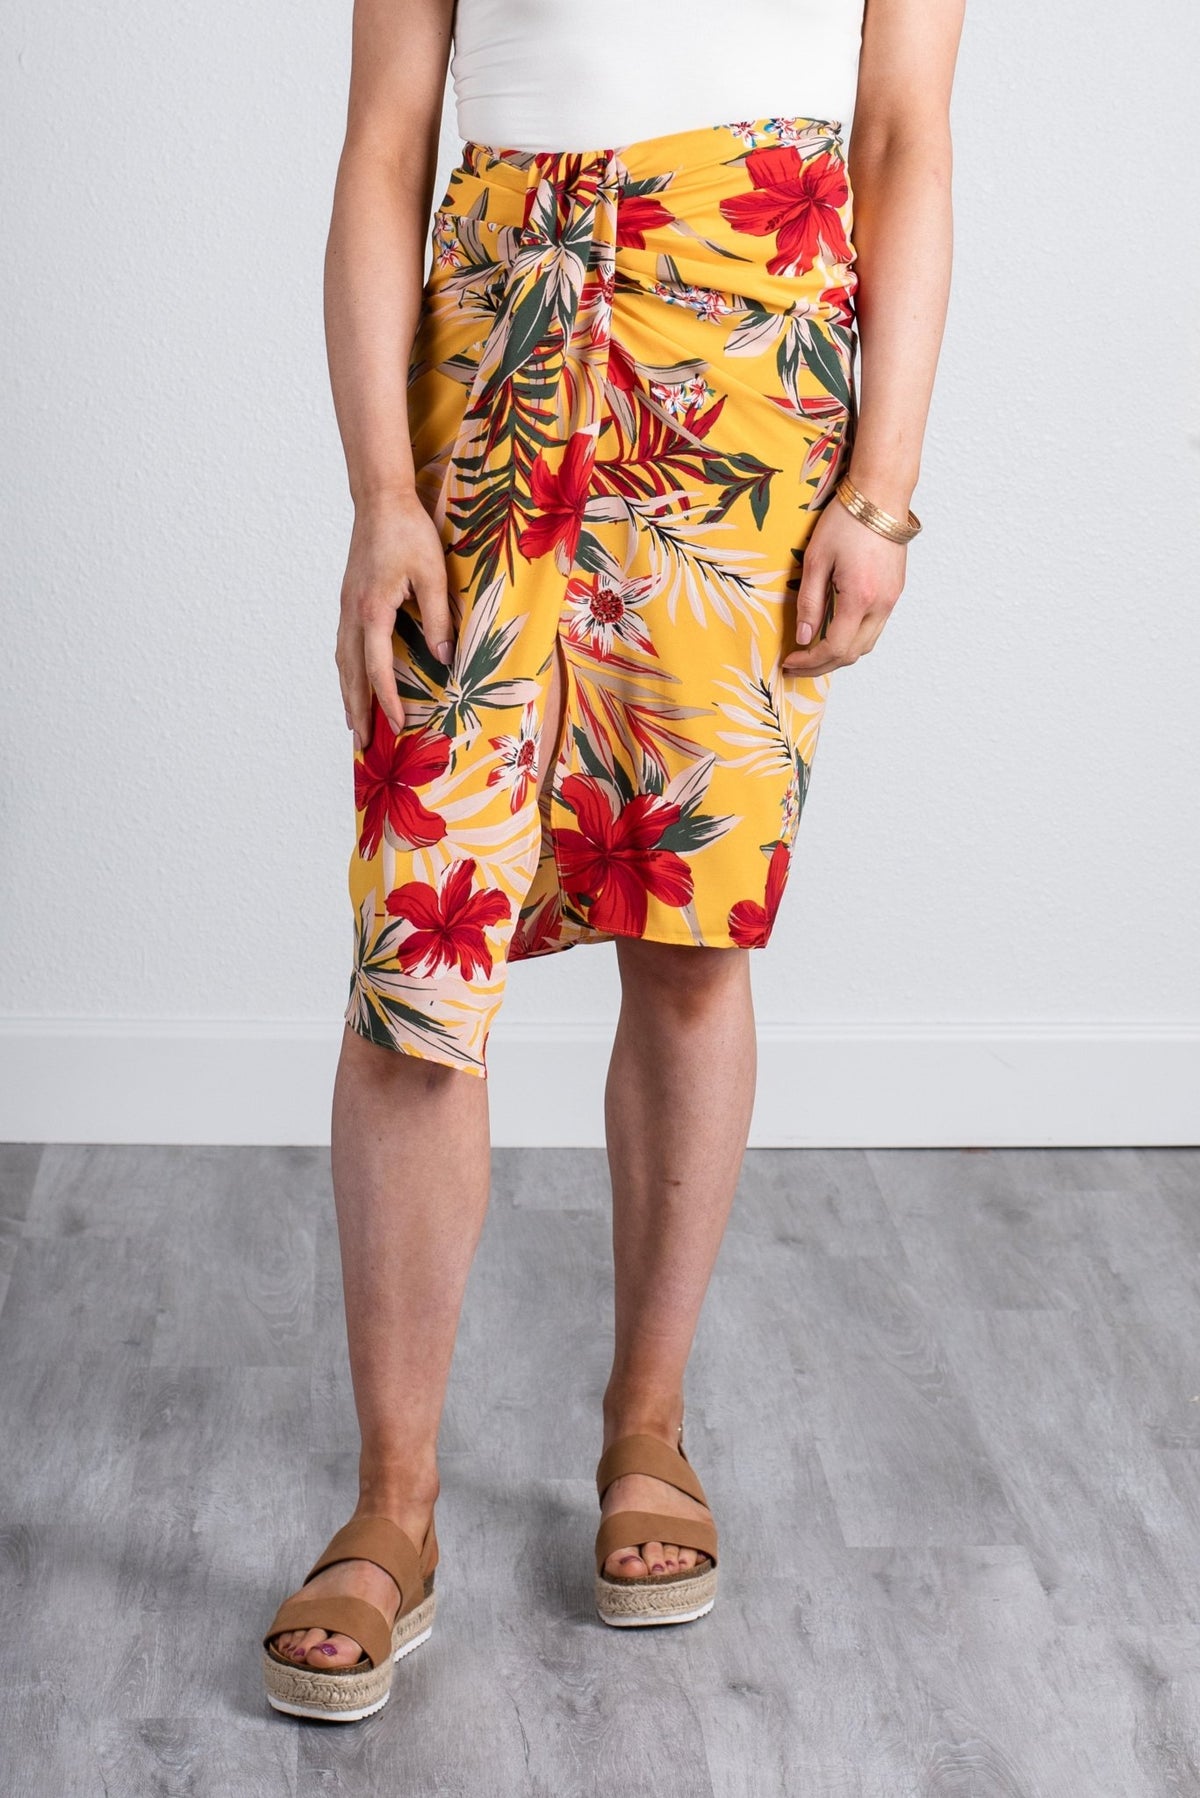 Tropical print wrap skirt yellow | Lush Fashion Lounge: boutique skirts, affordable boutique skirts, cute affordable skirts